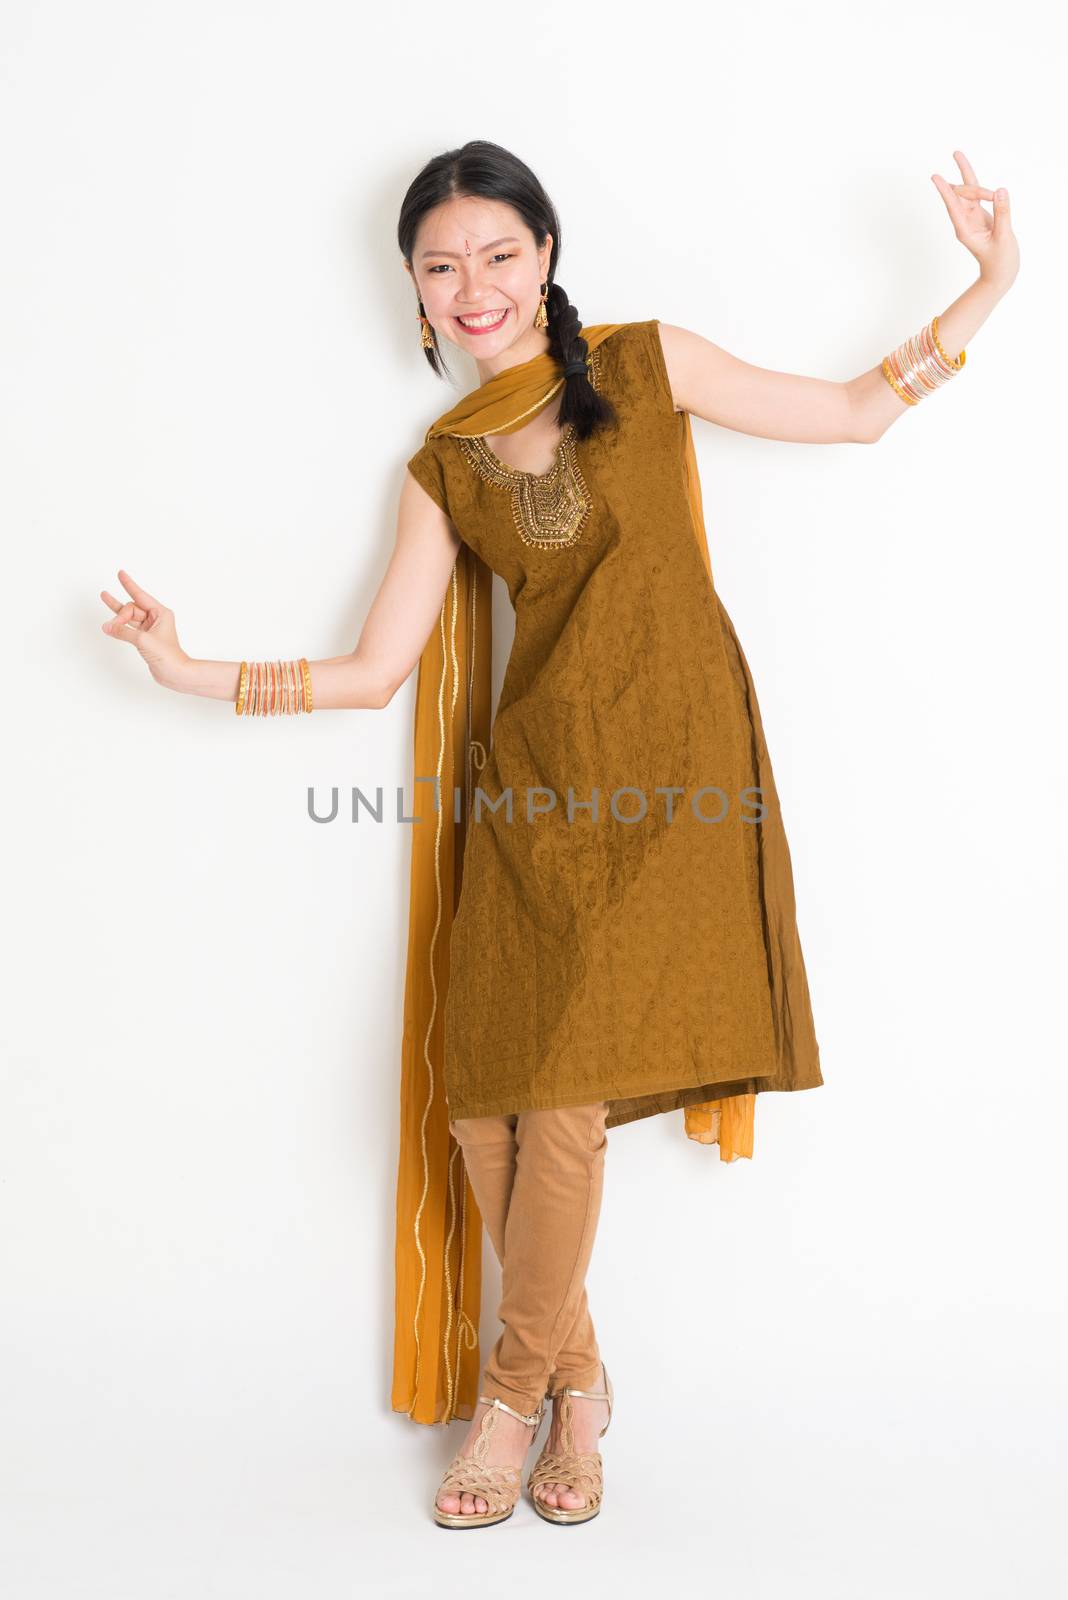 Portrait of mixed race Indian Chinese woman in traditional punjabi dress dancing, full length standing on plain white background.